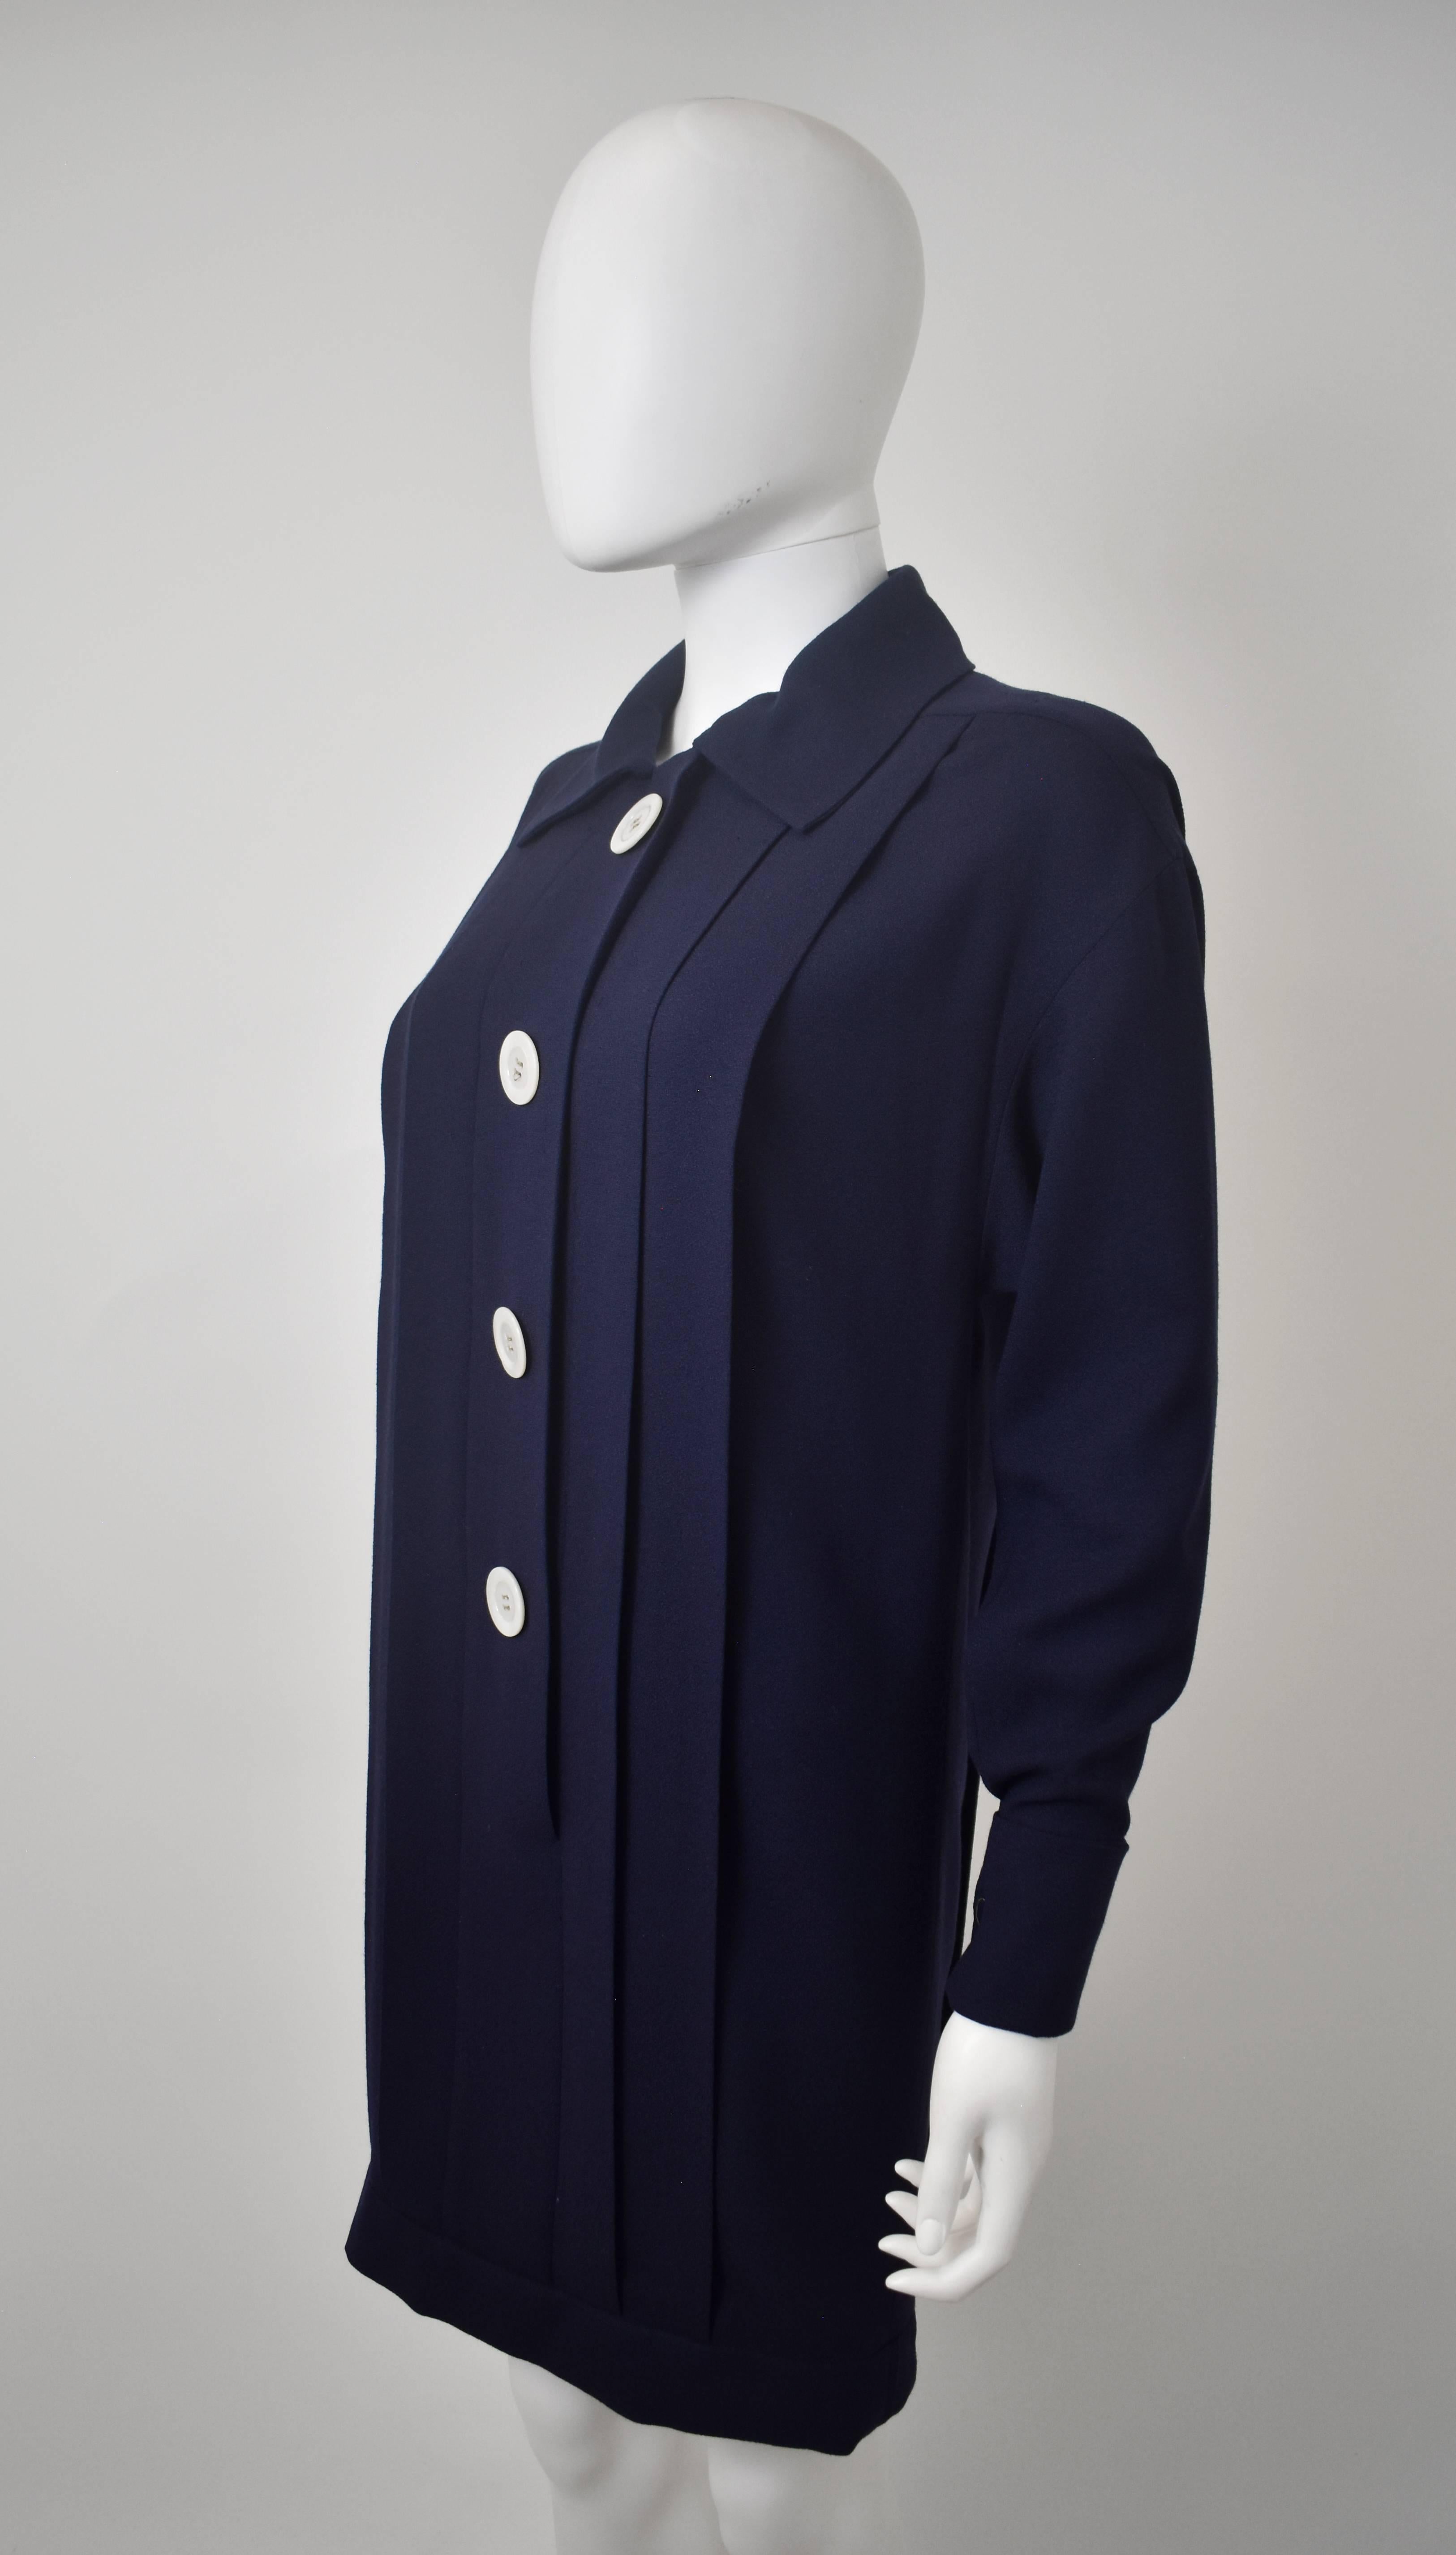 A classic Karl Lagerfeld designed Chanel dress from the 1990's with a simple, elegant shape that pays homage to Coco Chanel's 1930's resort-wear heritage. The dress is made from a navy blue wool crepe and has a straight cut with collar, front